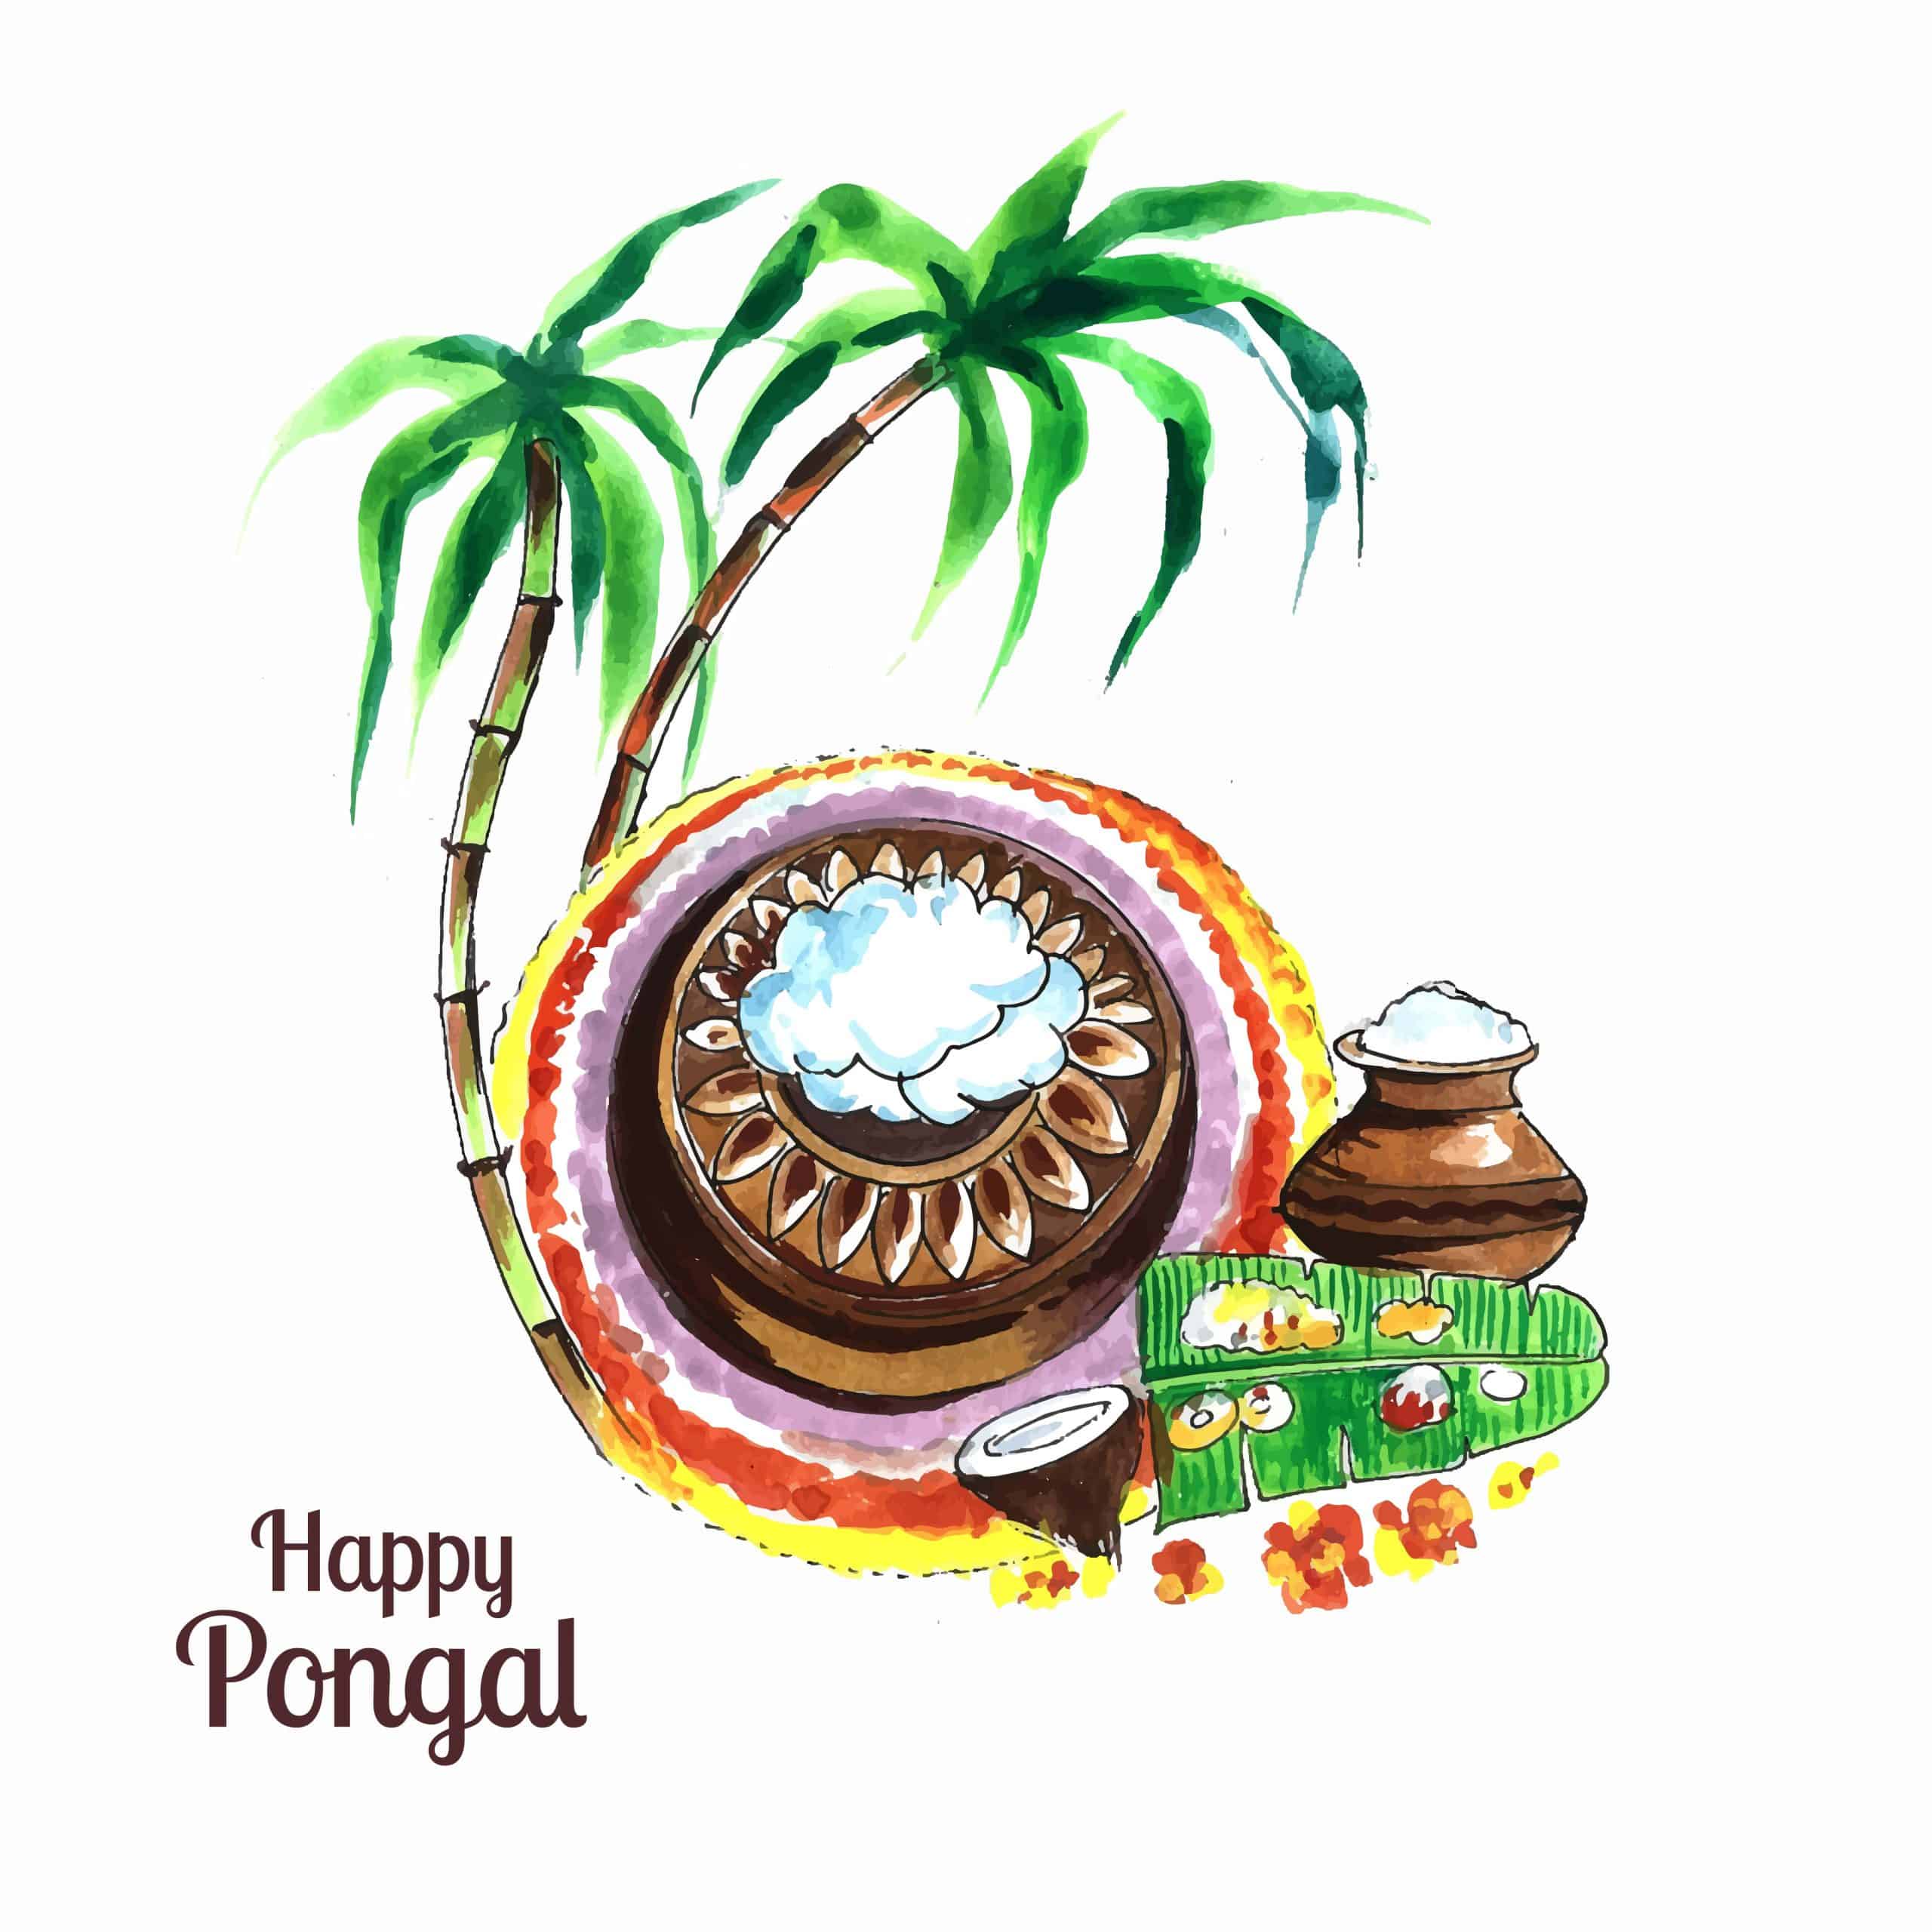 Happy Pongal Images HD